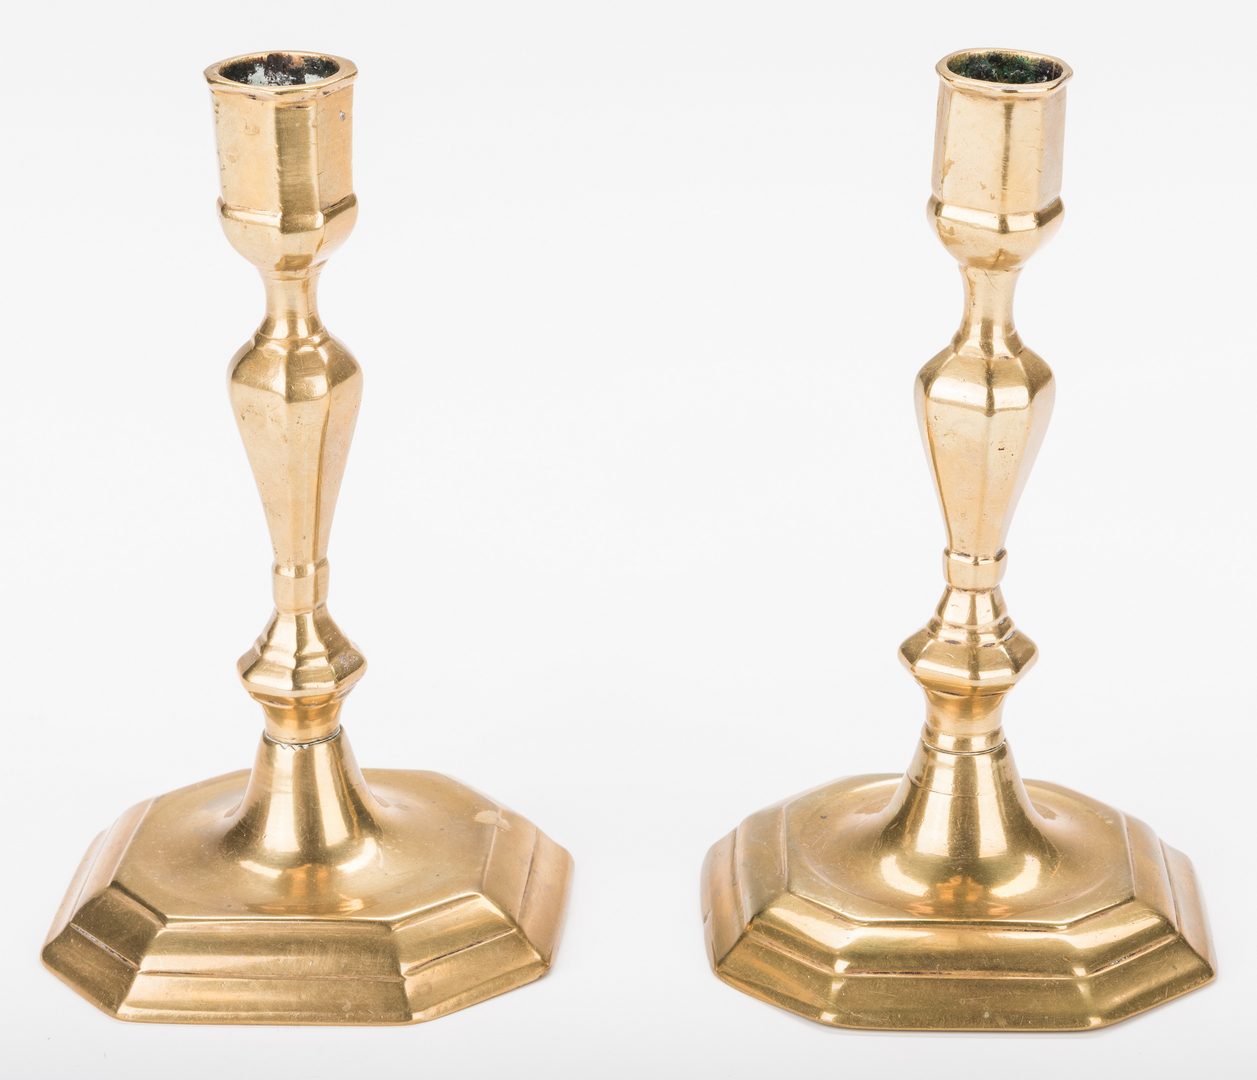 Lot 319: 6 Brass Candlesticks plus Snuffers and Stand